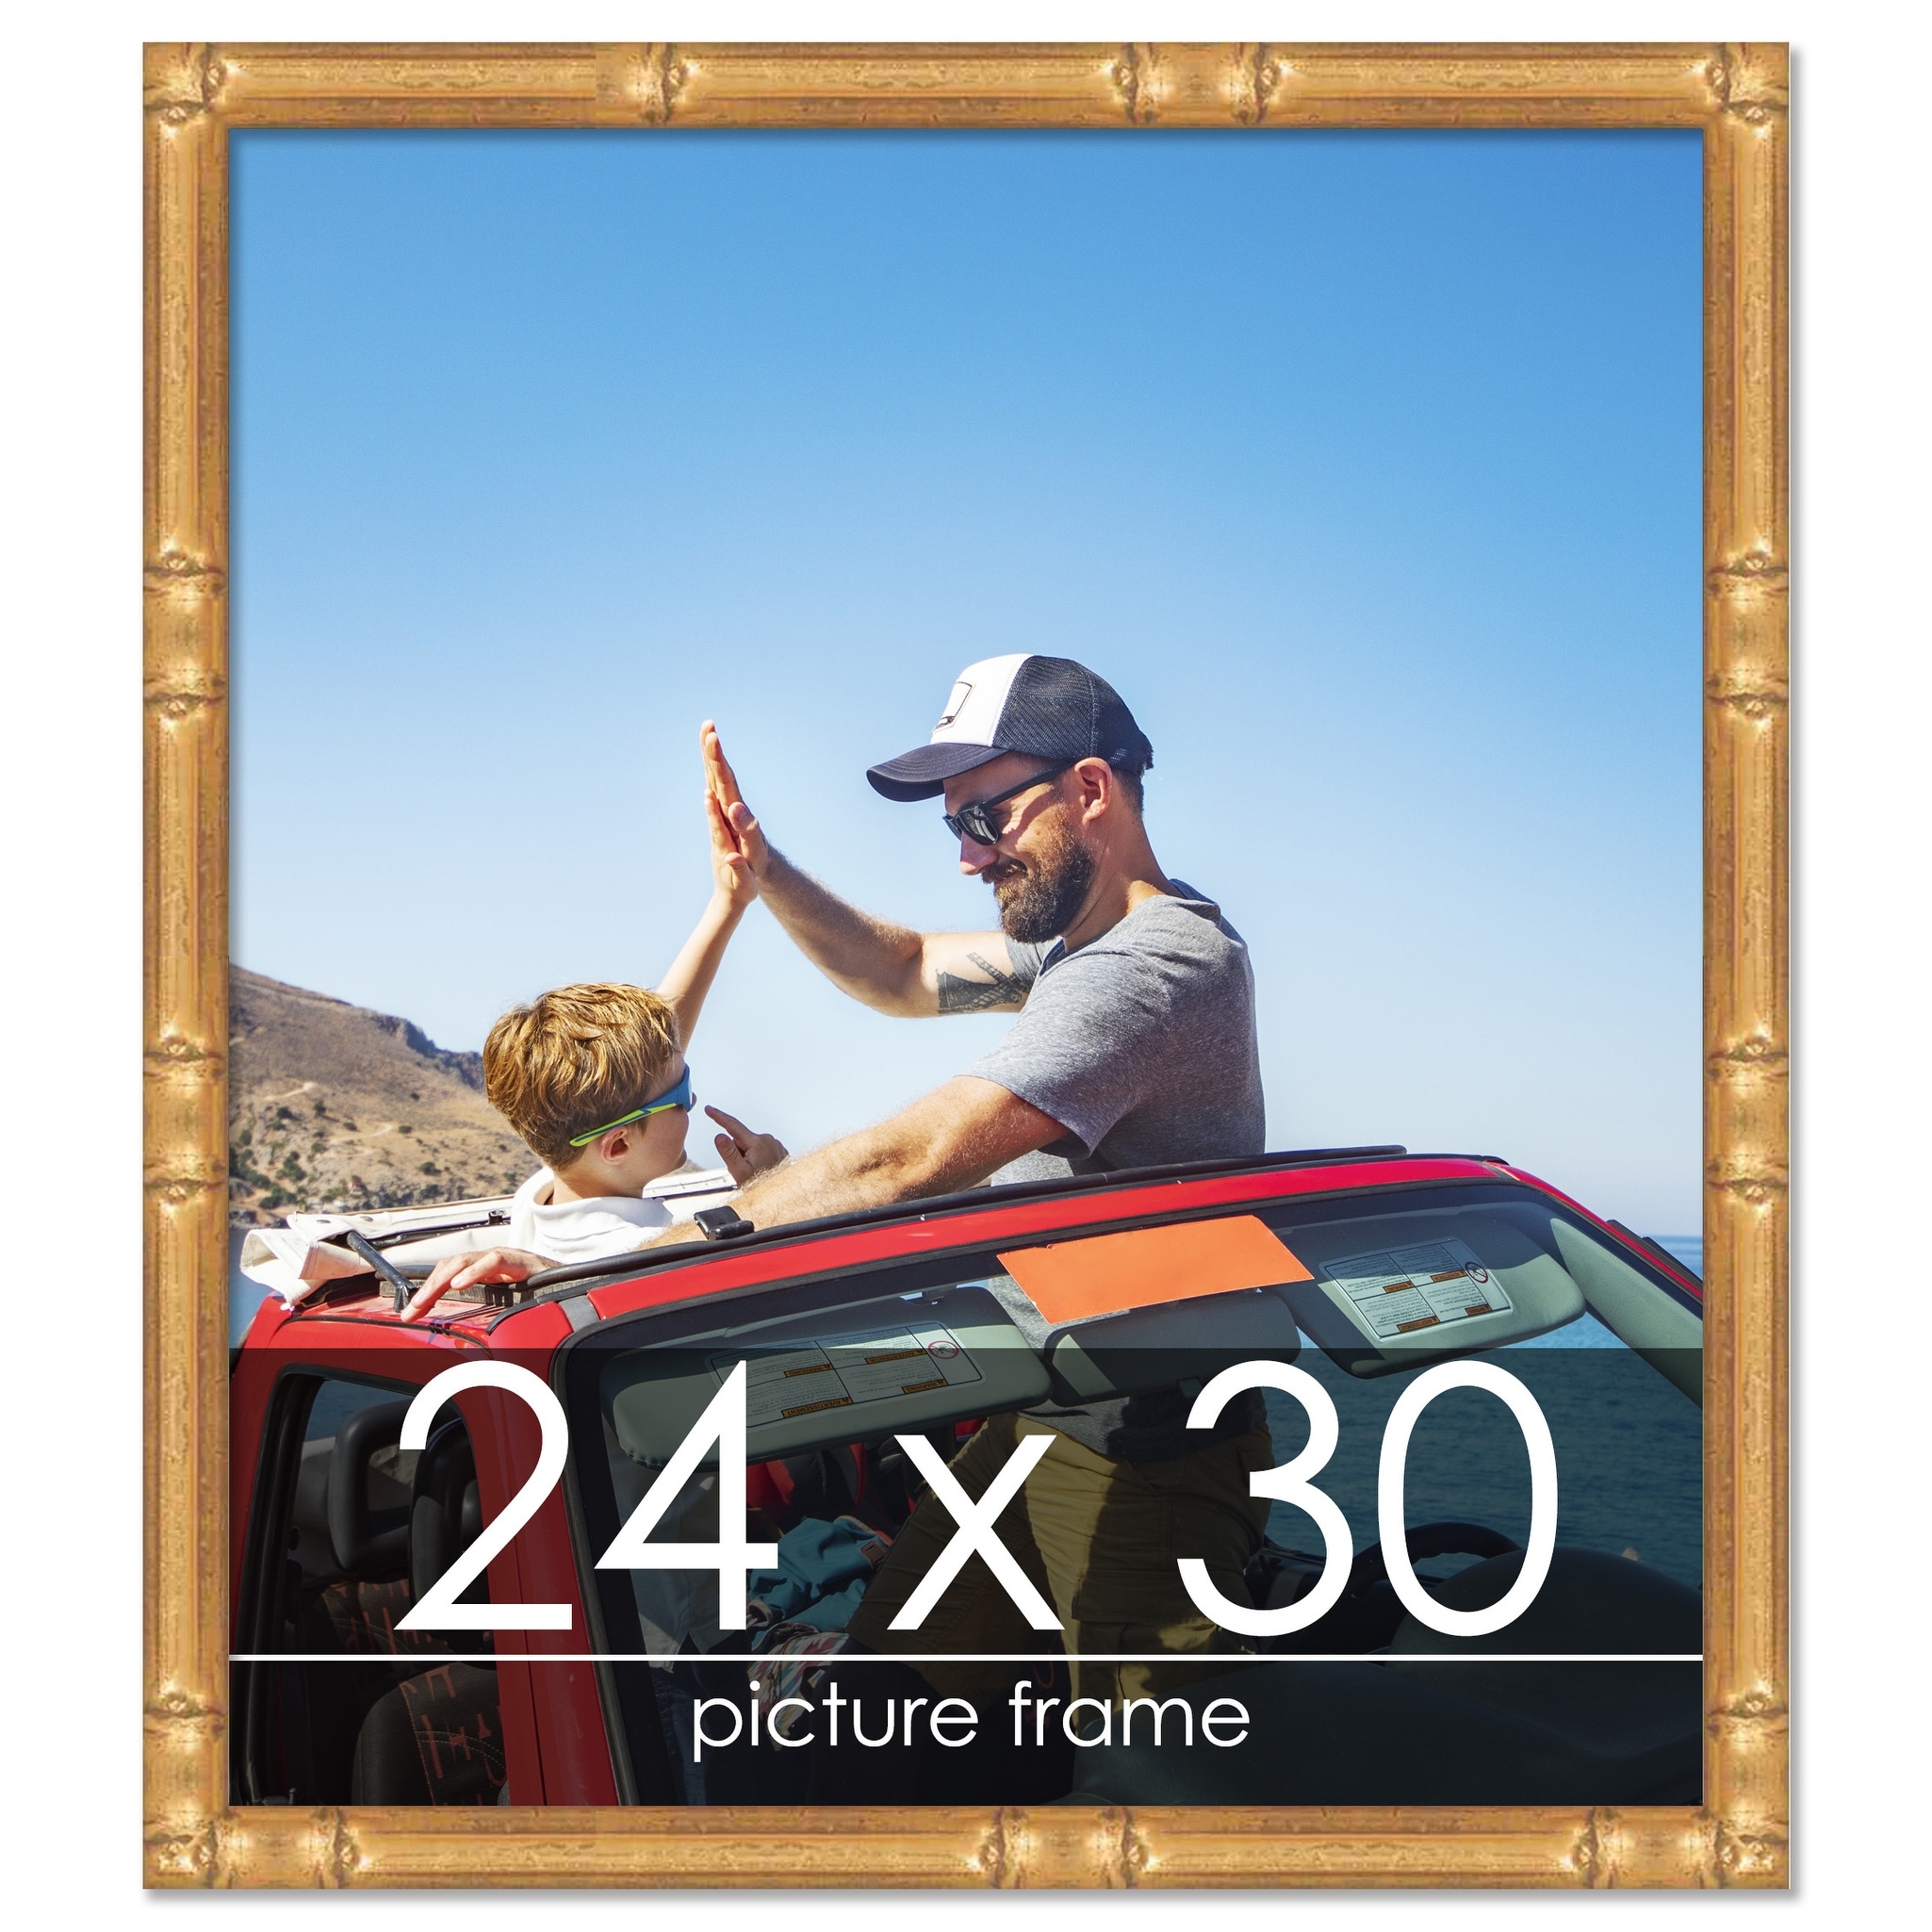 24x30 Frame Gold Bamboo Solid Wood Picture Frame with UV Acrylic, Foam Board Backing & Hanging Hardware Included